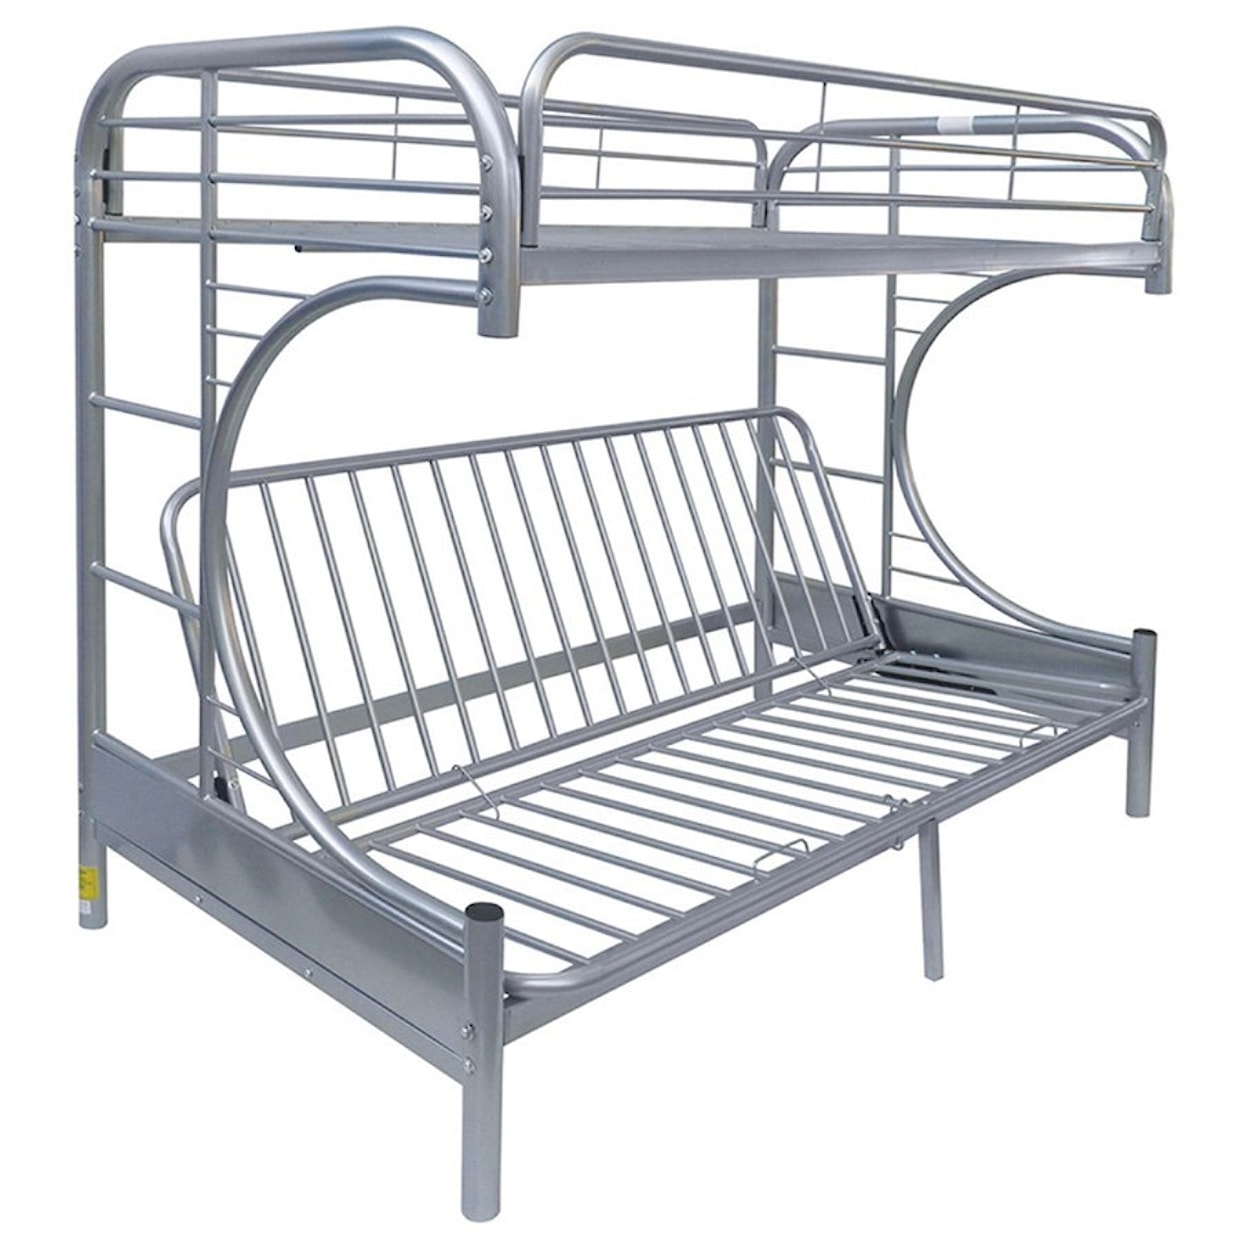 Acme Furniture Eclipse Twin/Full Bunk Bed